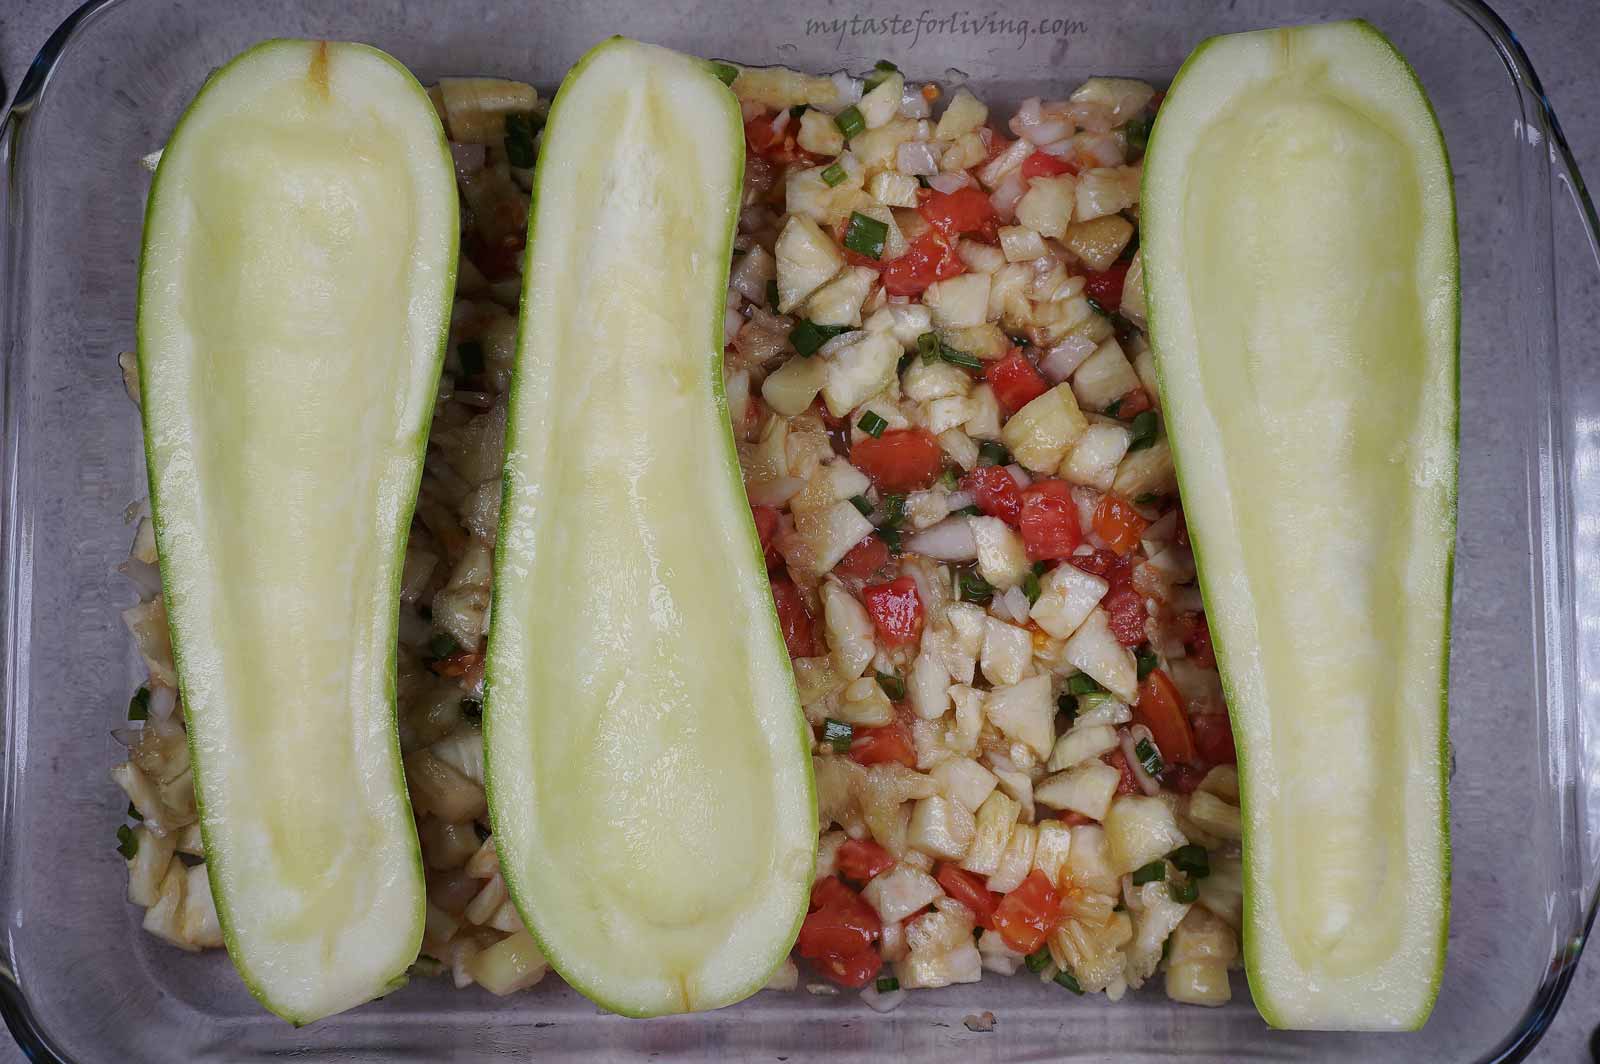 Stuffed zucchini (or boats) with feta cheese and tomatoes, baked in the oven or in short - one of my favourite summer dishes. I love that this recipe also uses the insides of the zucchini, resulting in a very tasty and light dish.